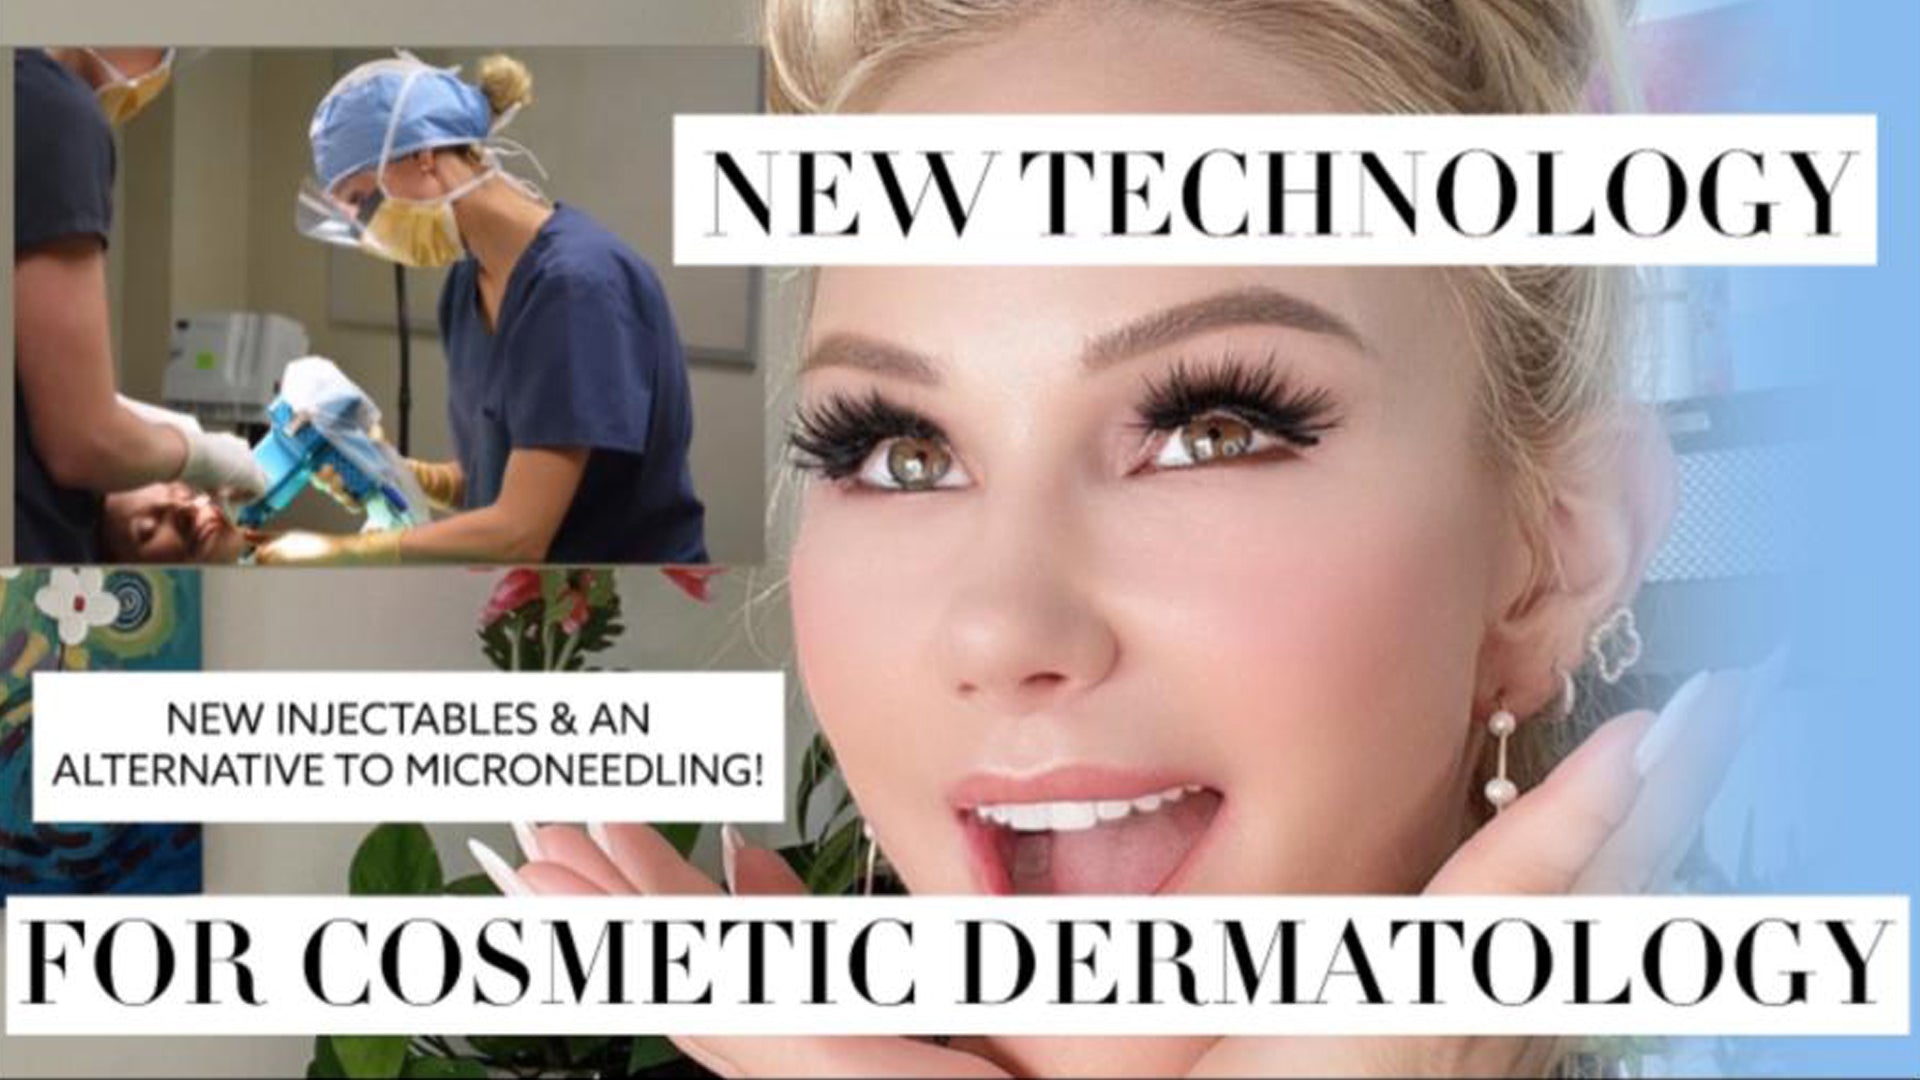 New injectables & an alternative to microneedling: these are the new dermatologic technologies you’ll want to know about!